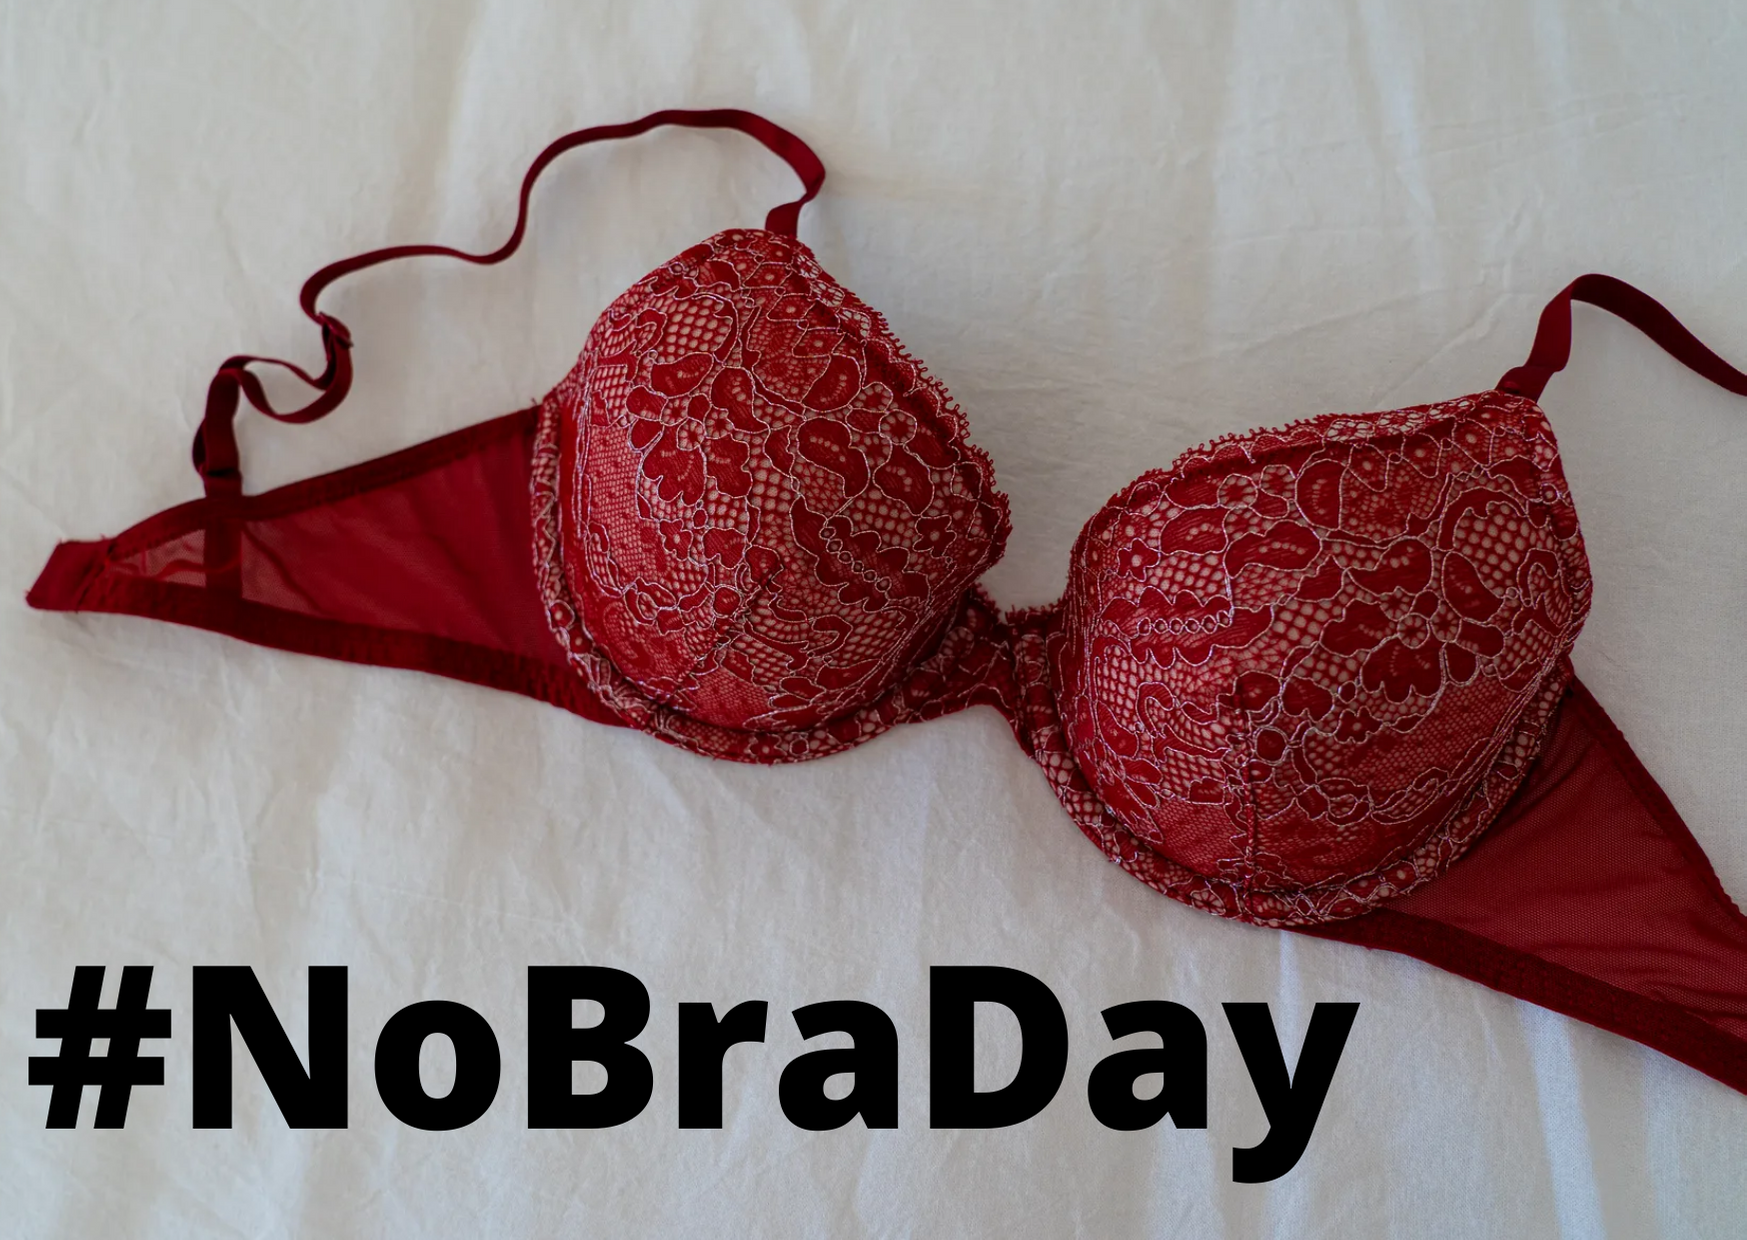 What is No Bra Day and why is it trending on social media?